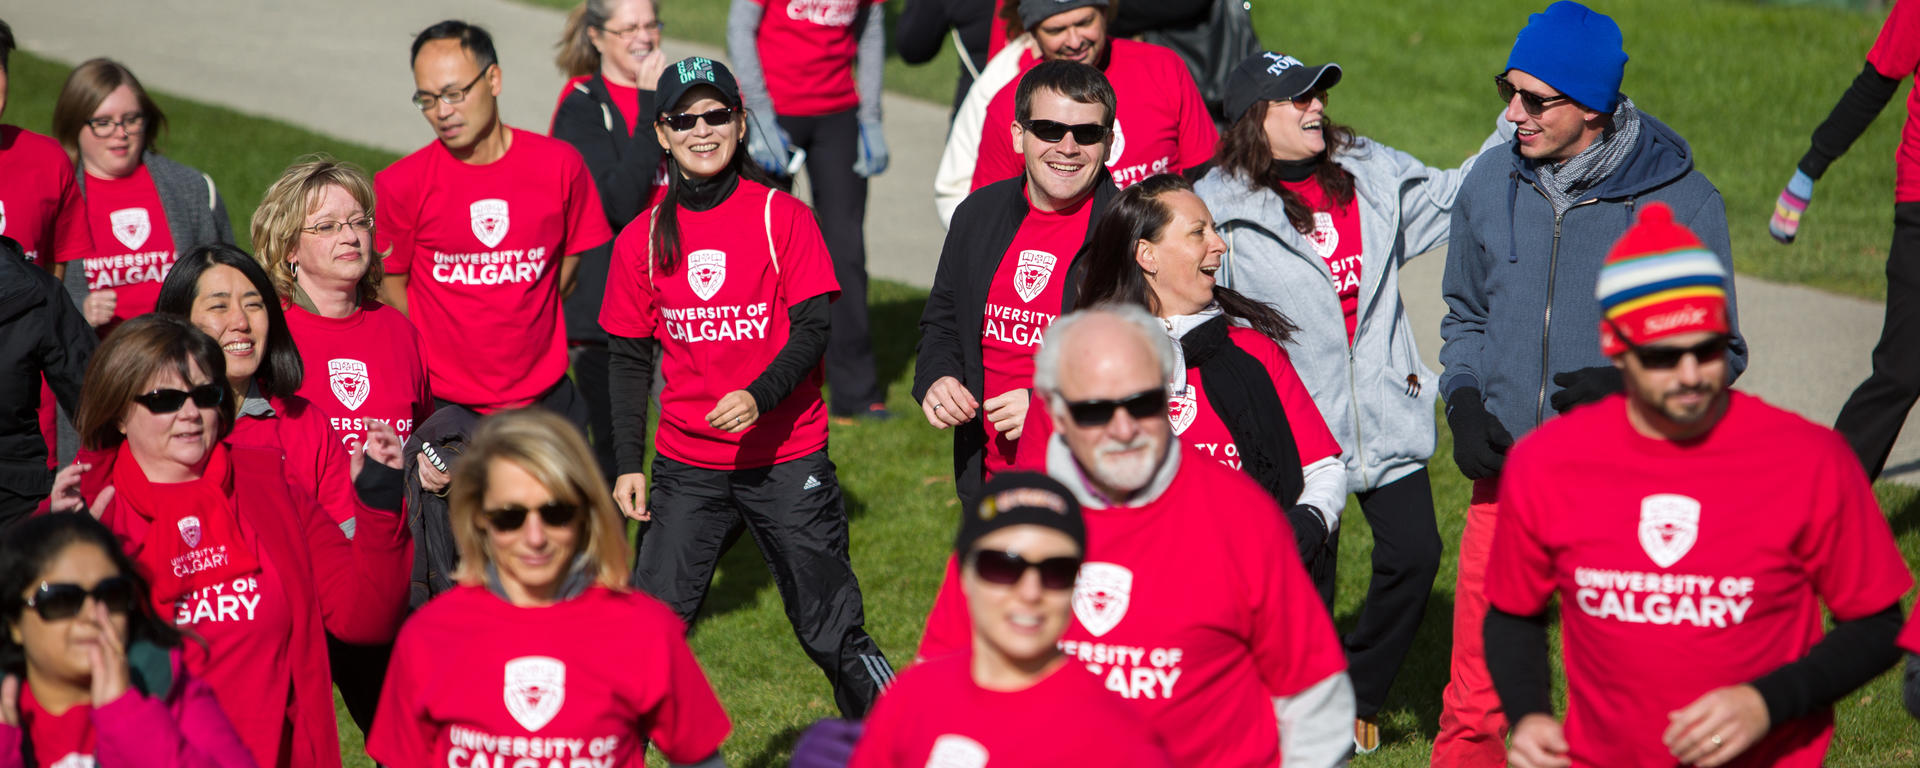 UCalgary staff participating in the 2019 United Way Run